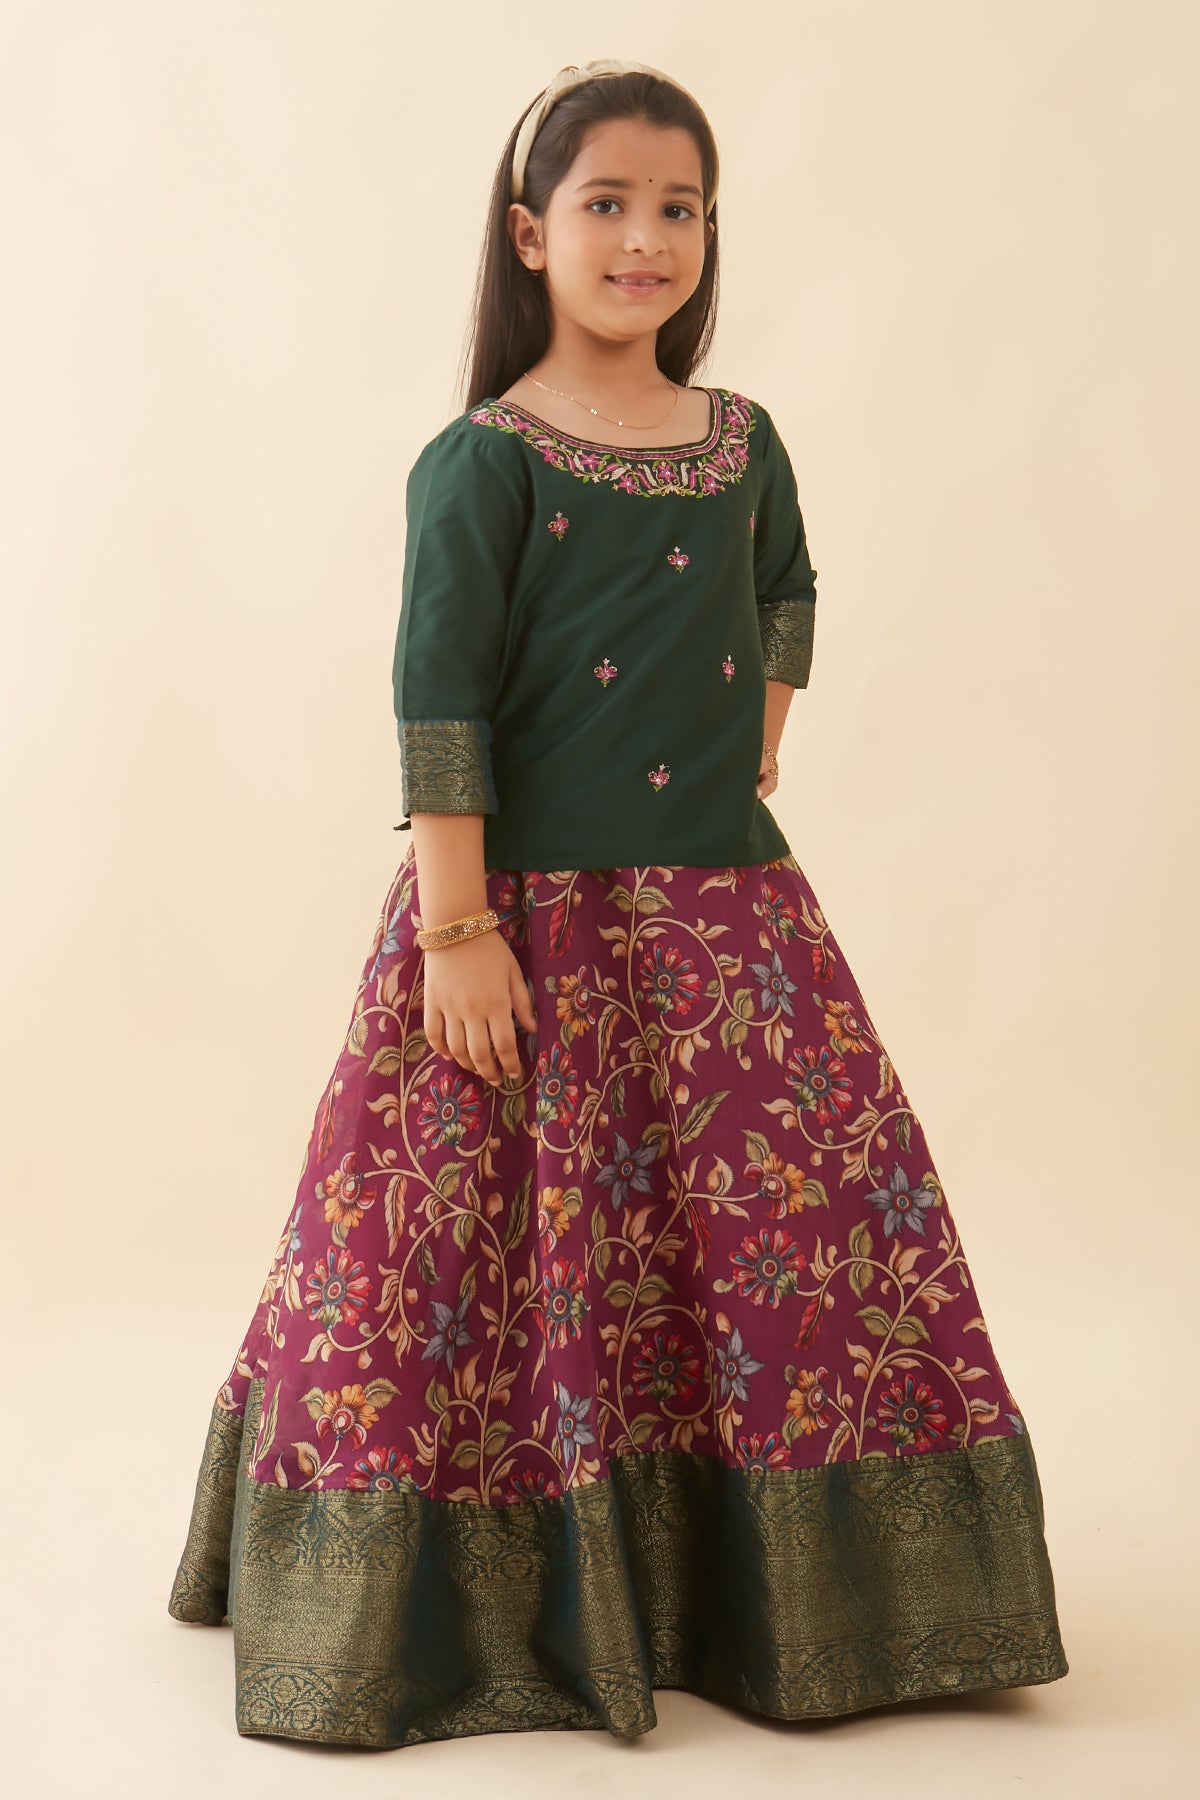 Floral Embroidered Printed With Zari Border Kids Skirt Set Green Purple